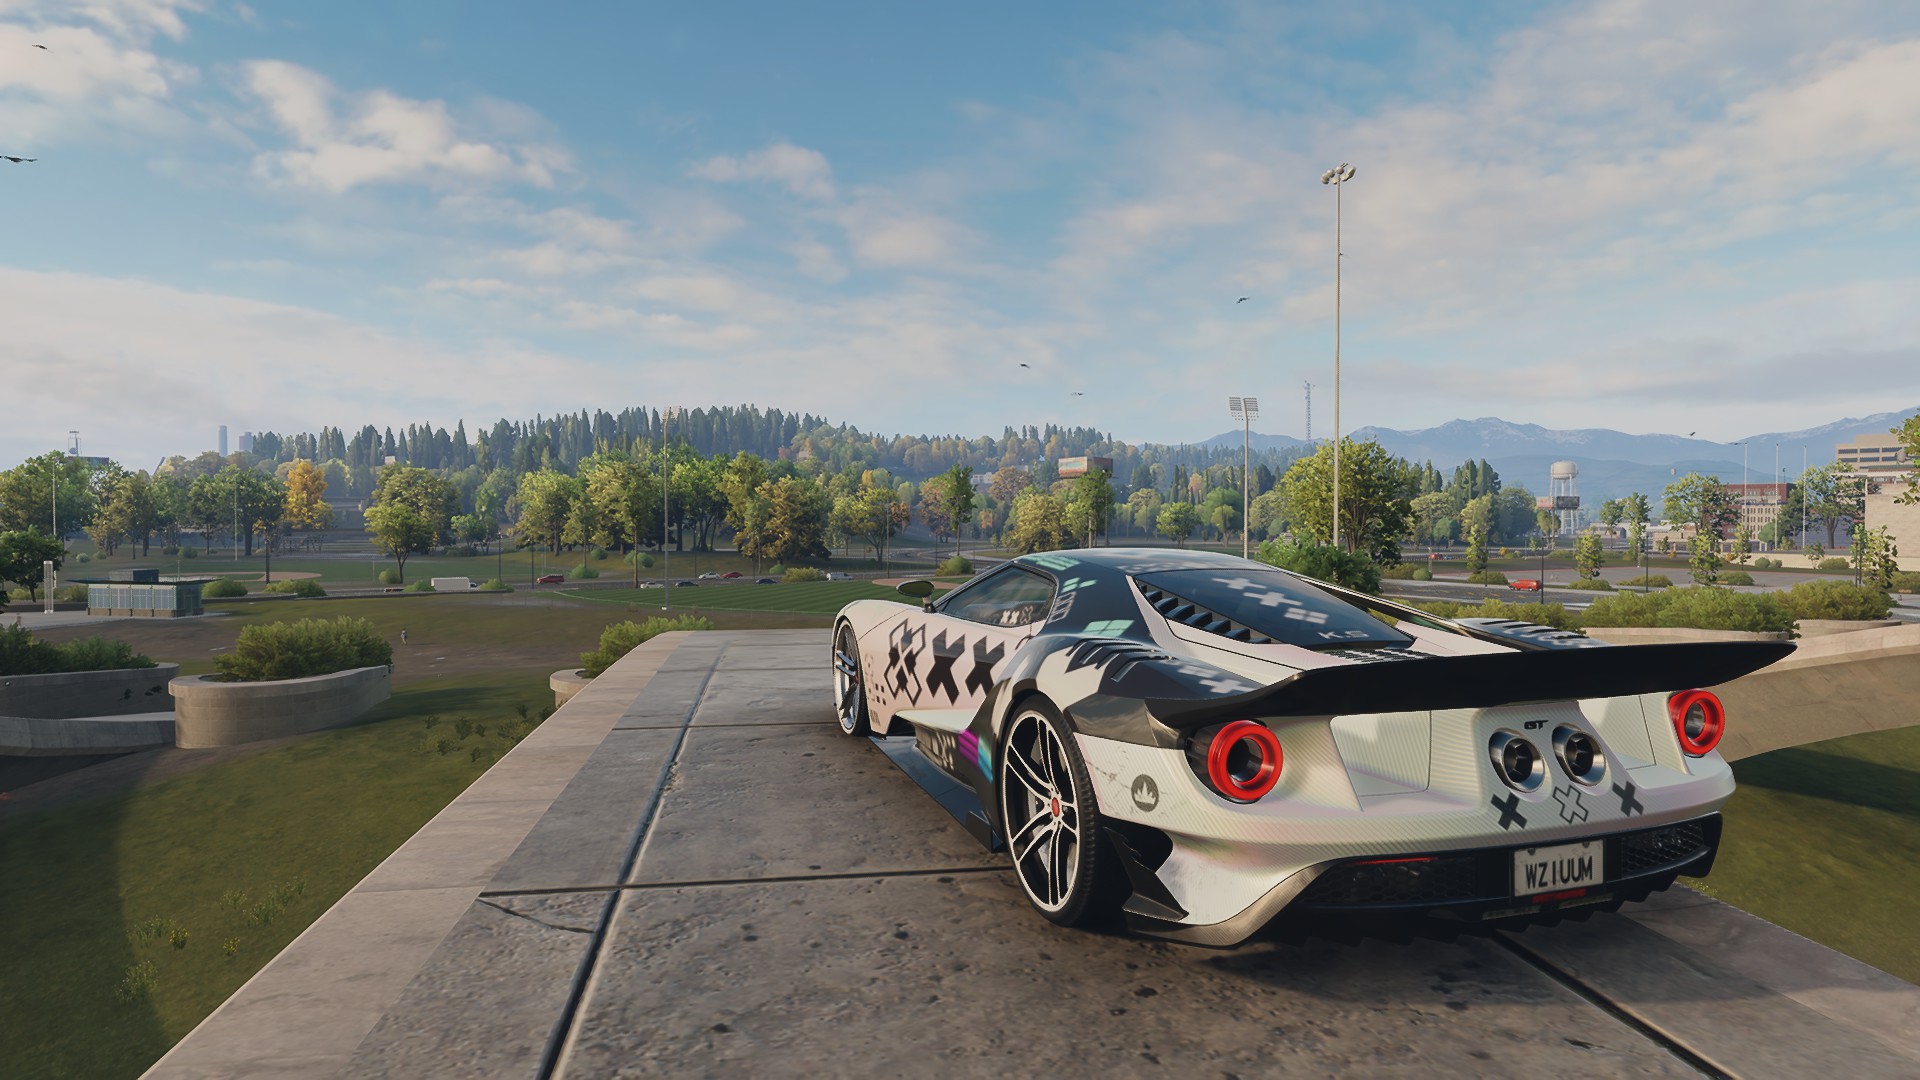 General 1920x1080 Need for speed Unbound clouds Ford GT landscape video games screen shot sky rear view licence plates car CGI trees